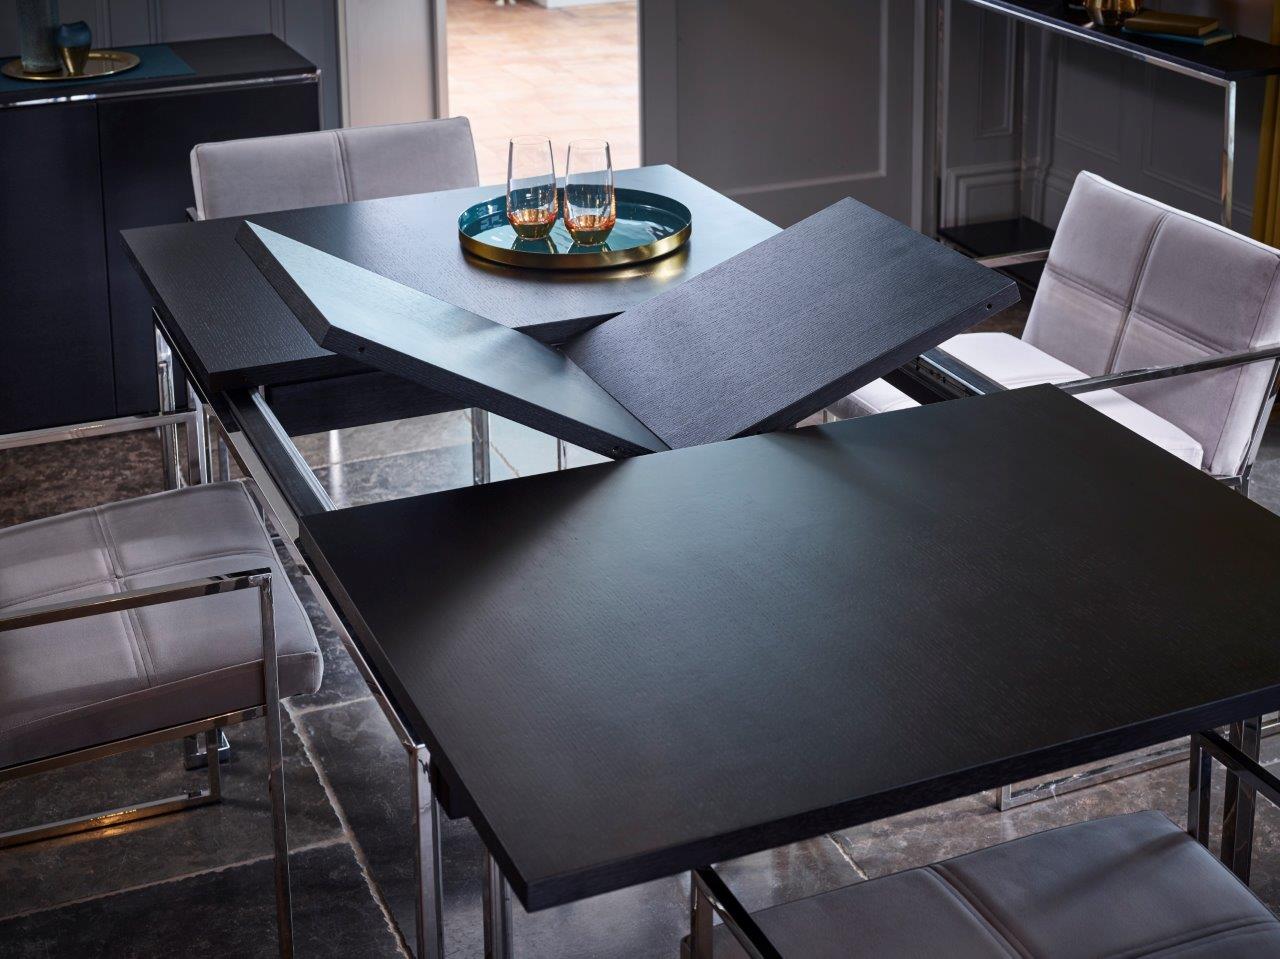 Federico Polished Extending Dining Table by Gillmore British Design